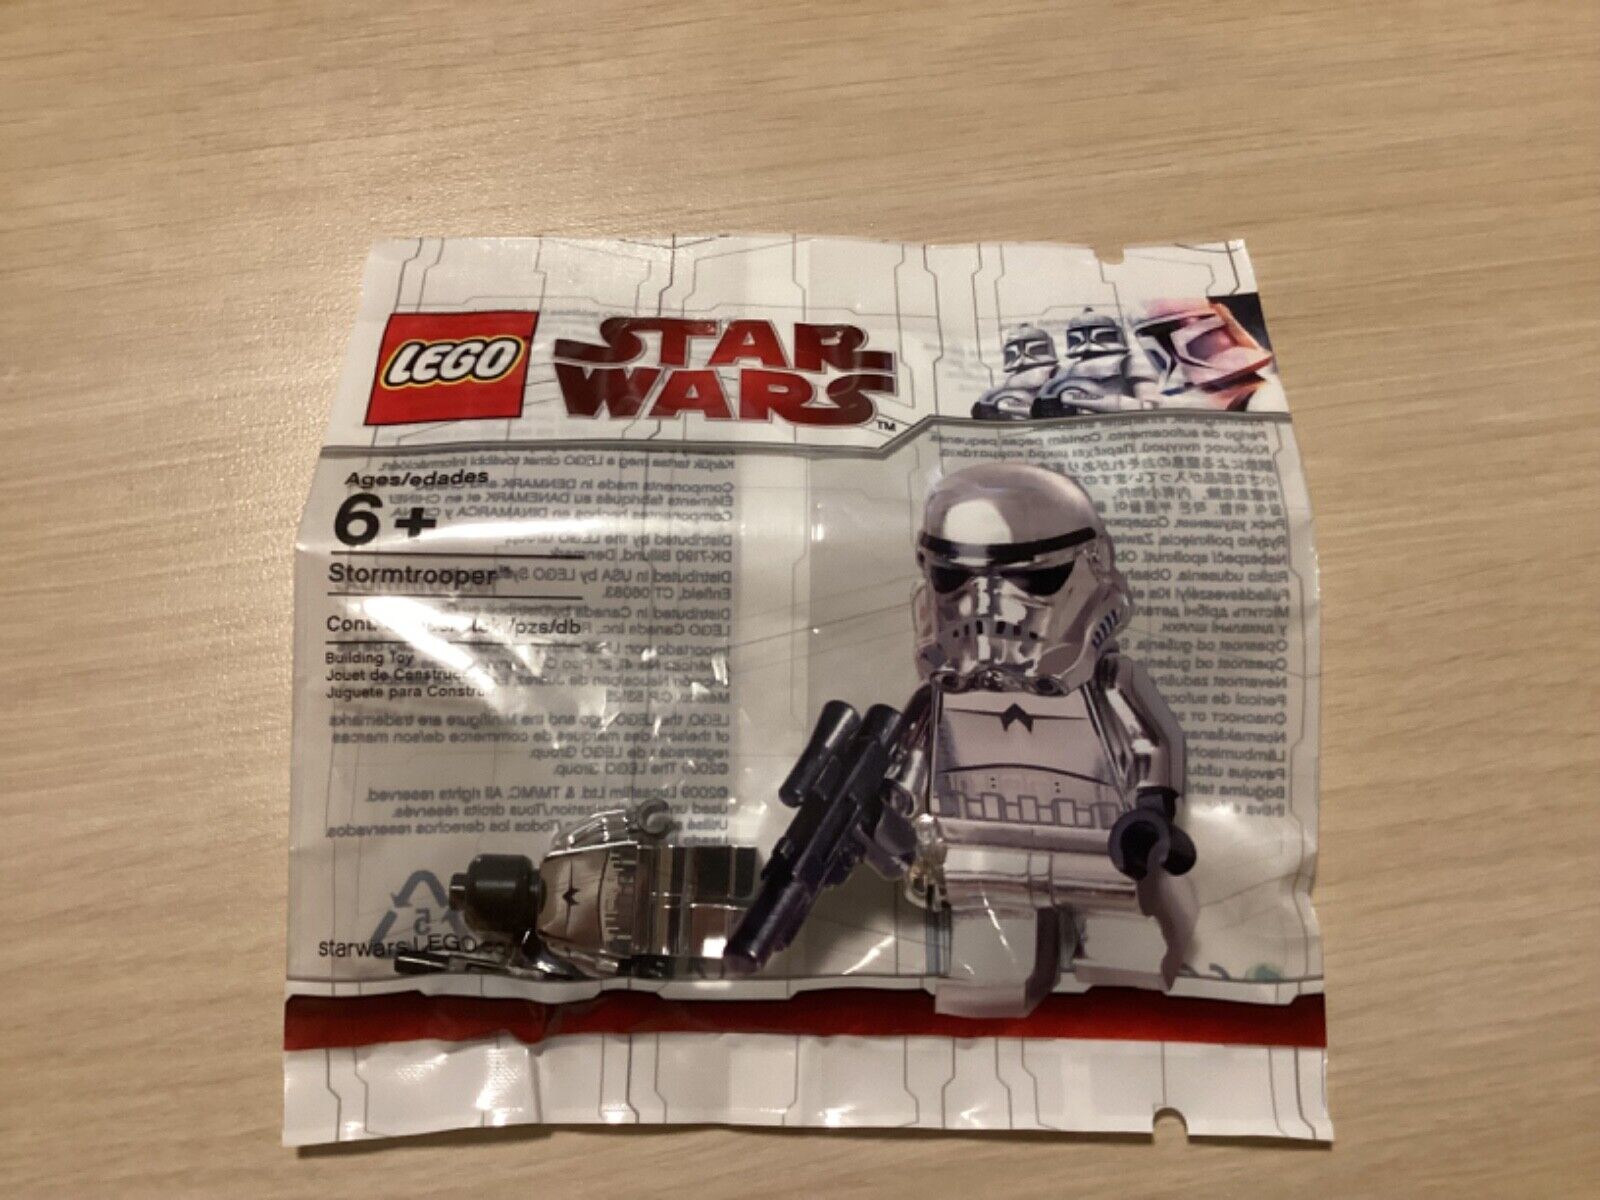 Lego 🌗Star Wars🌓Stormtrooper Chrome Minifig. Polybag💎Brand New Sealed 2009💎